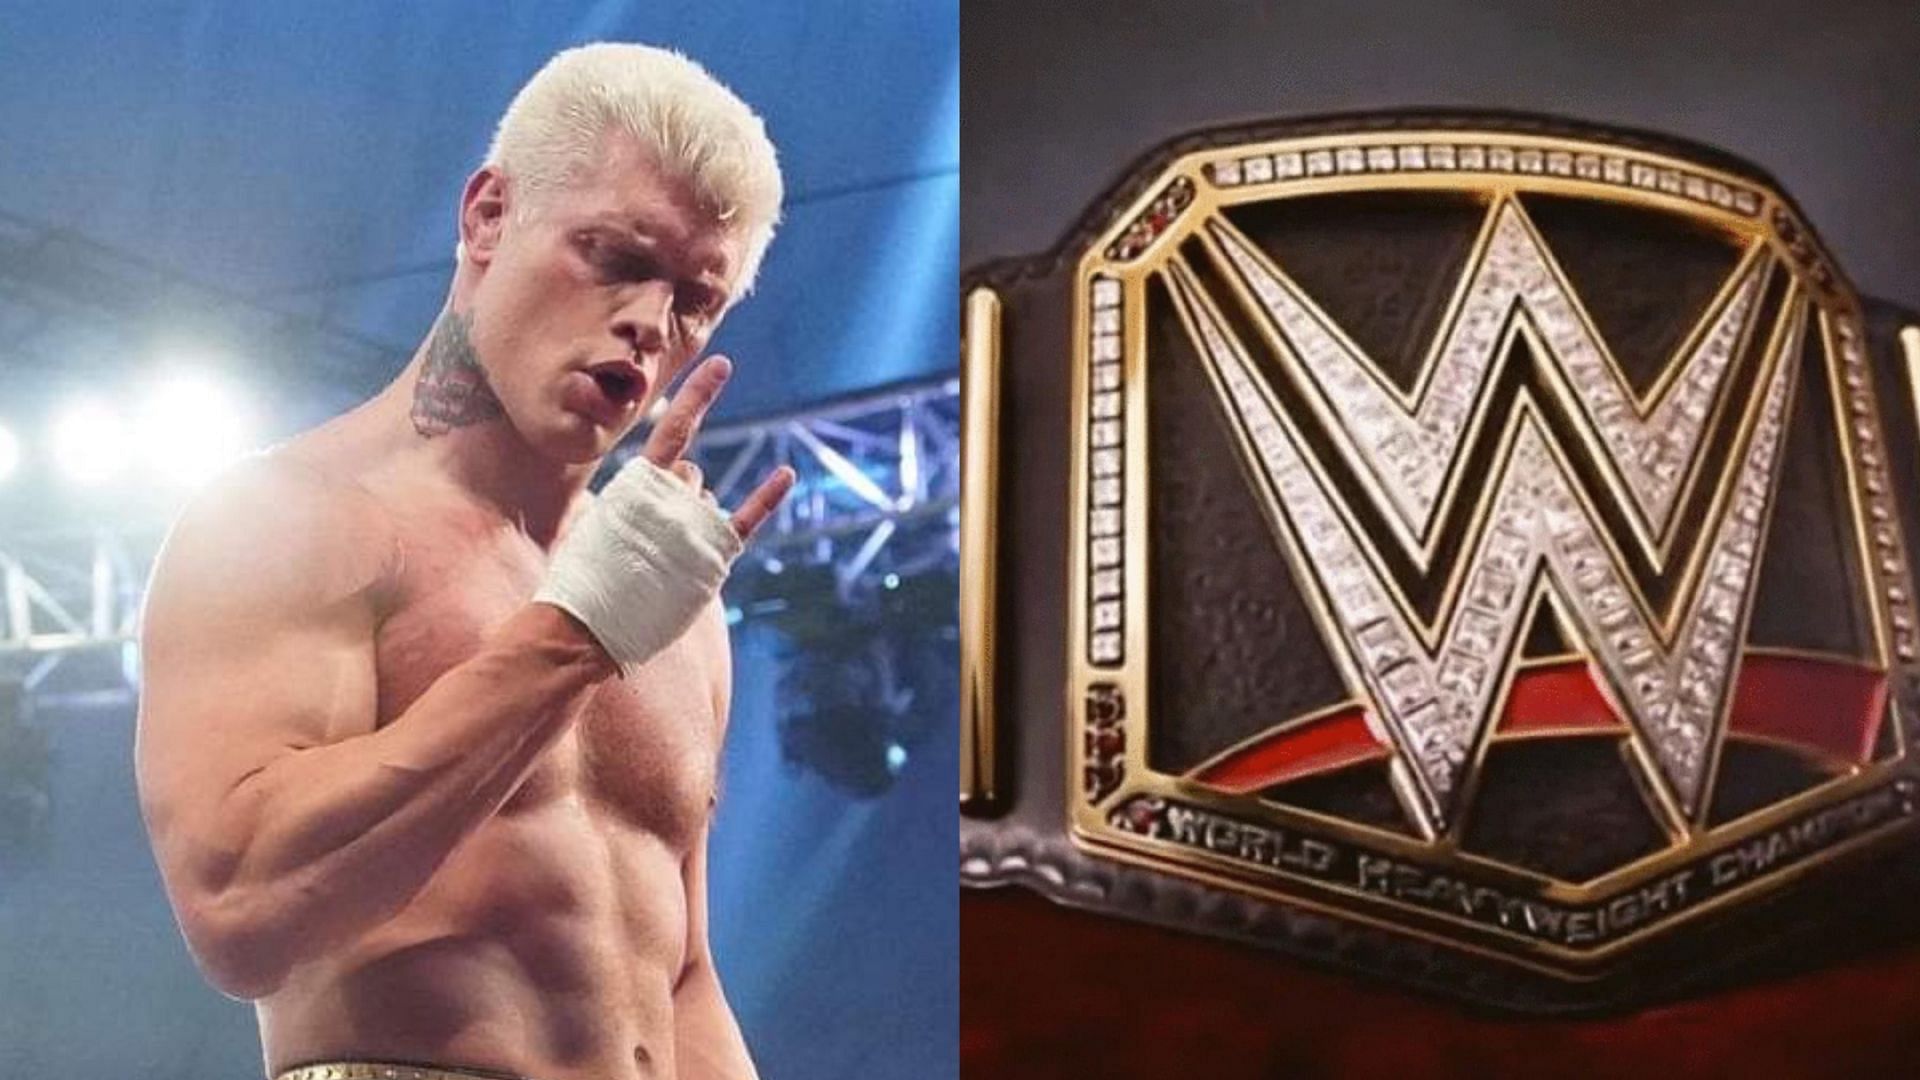 Cody Rhodes is set to main event WrestleMania 39